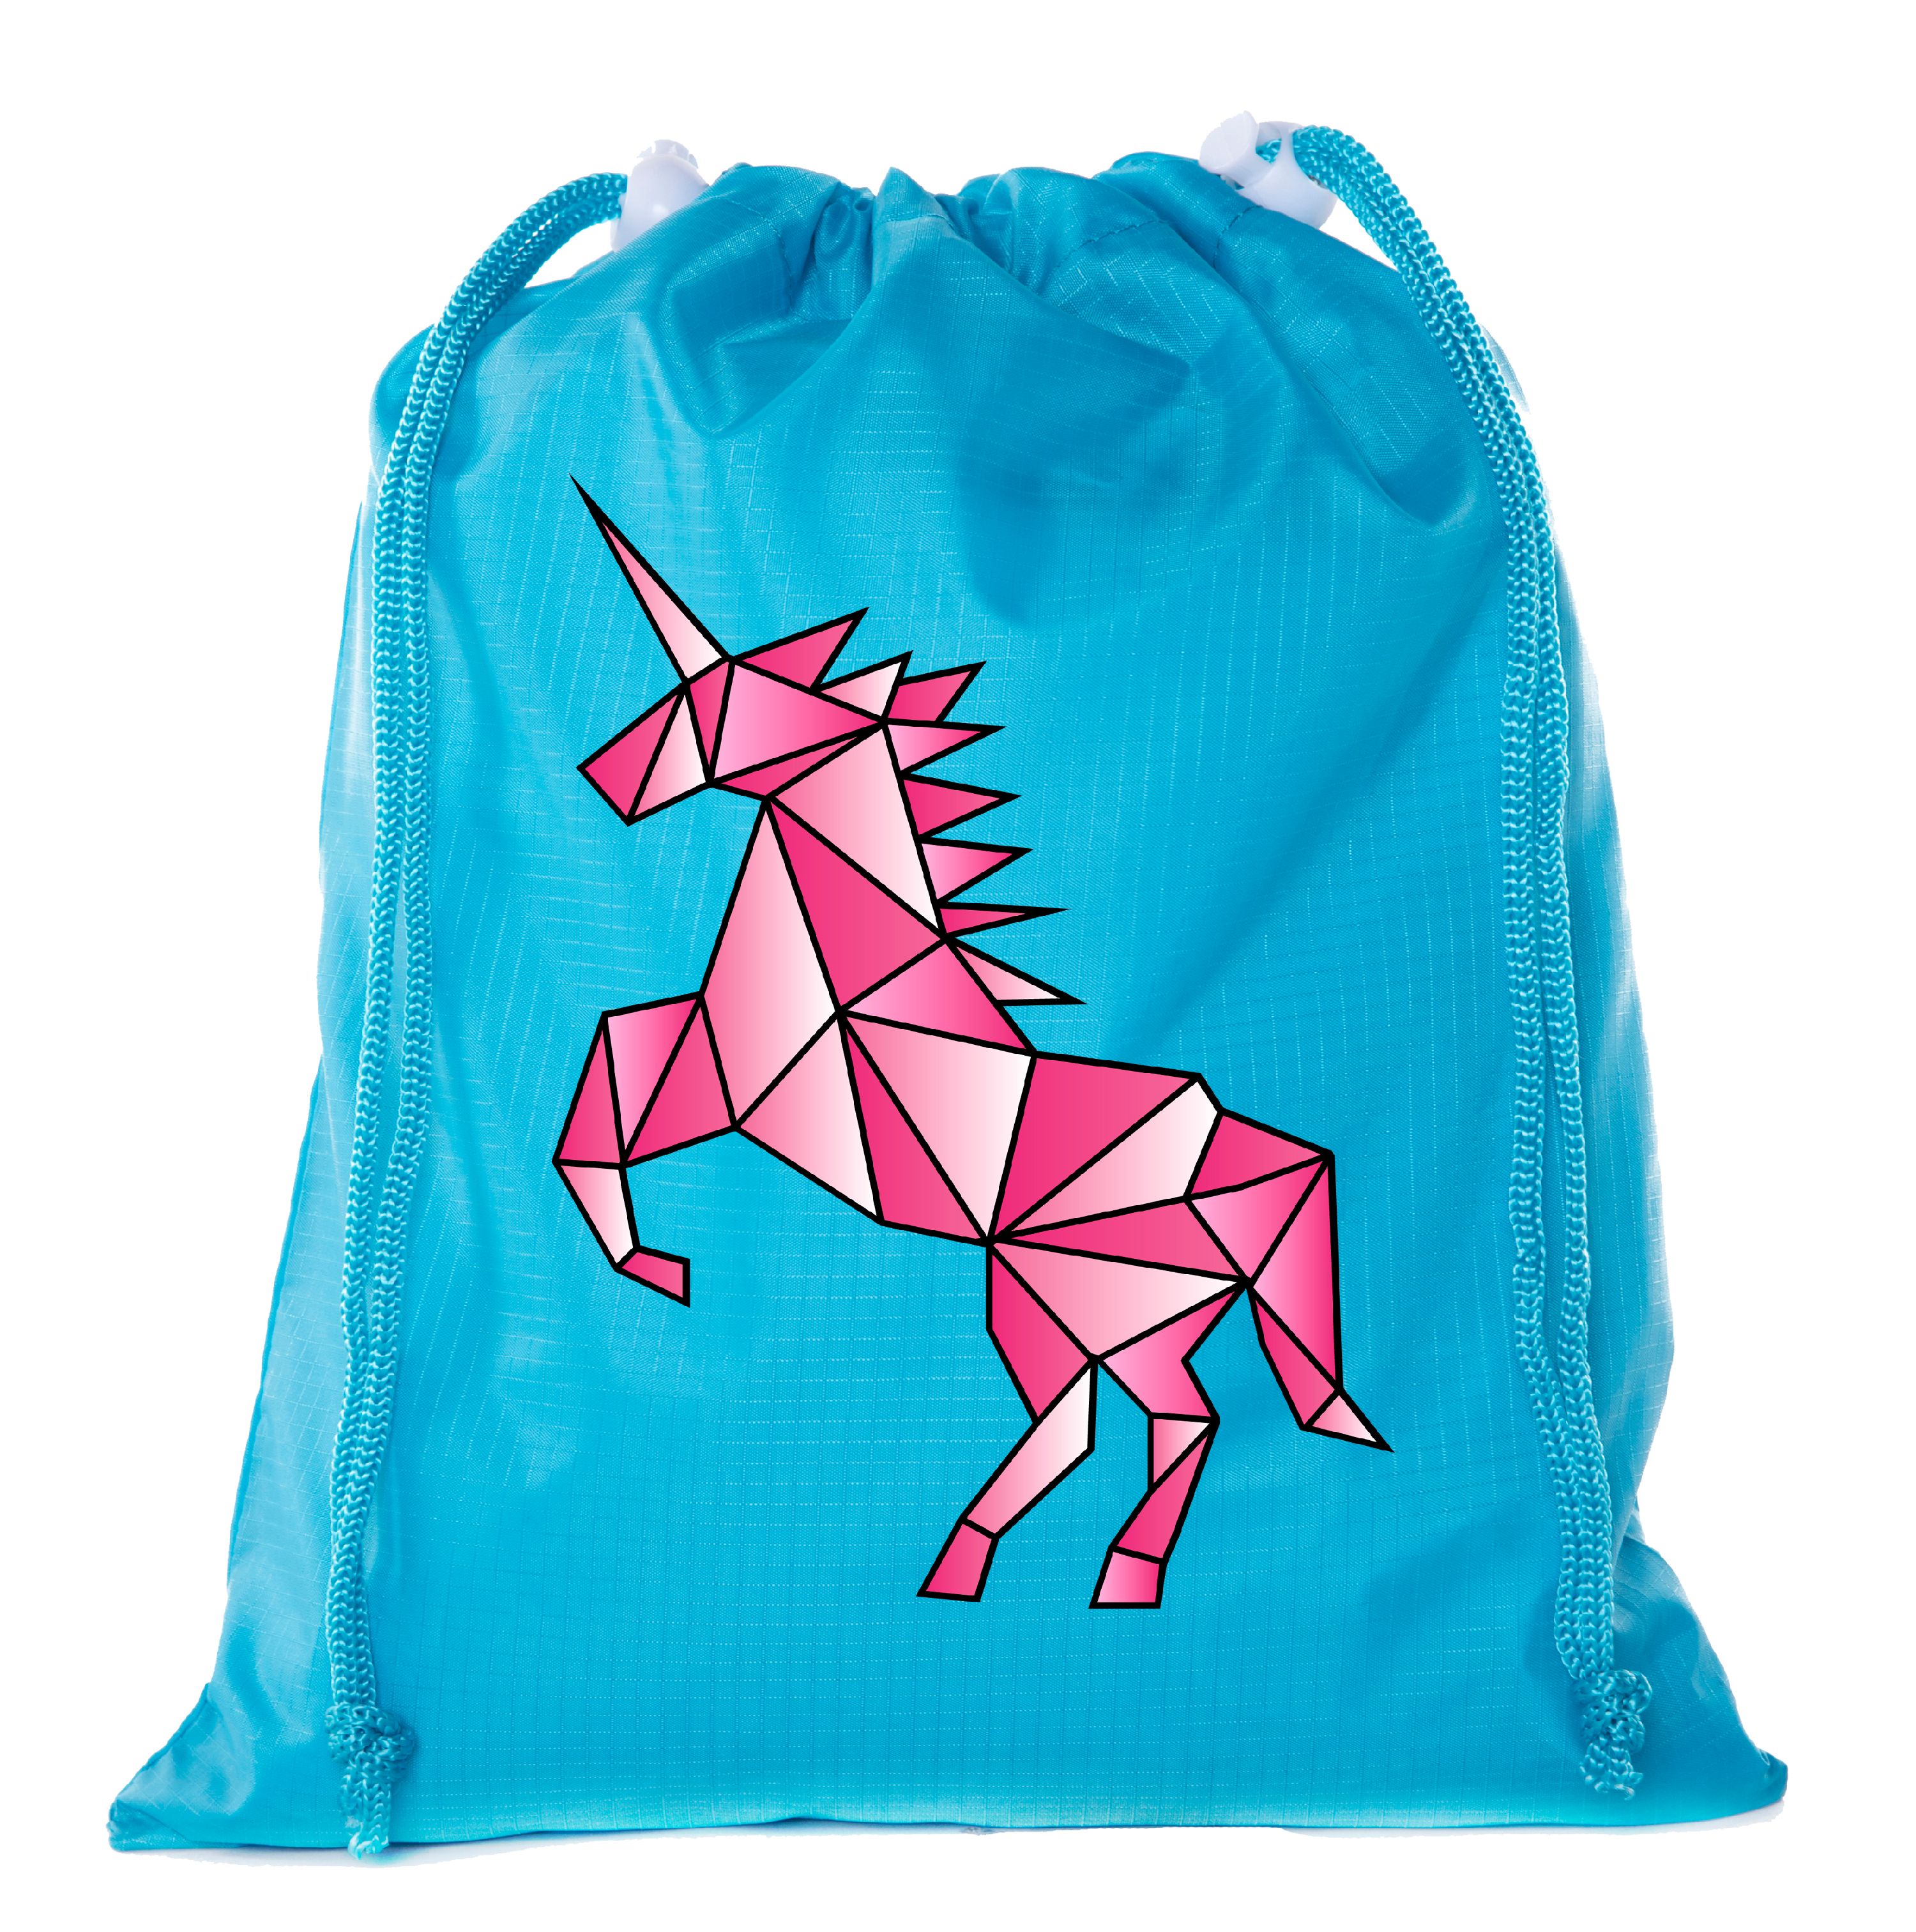 3-Dimensional Animal Bags, Mini Polygon Animal Favor bags, for School & Parties - image 1 of 2